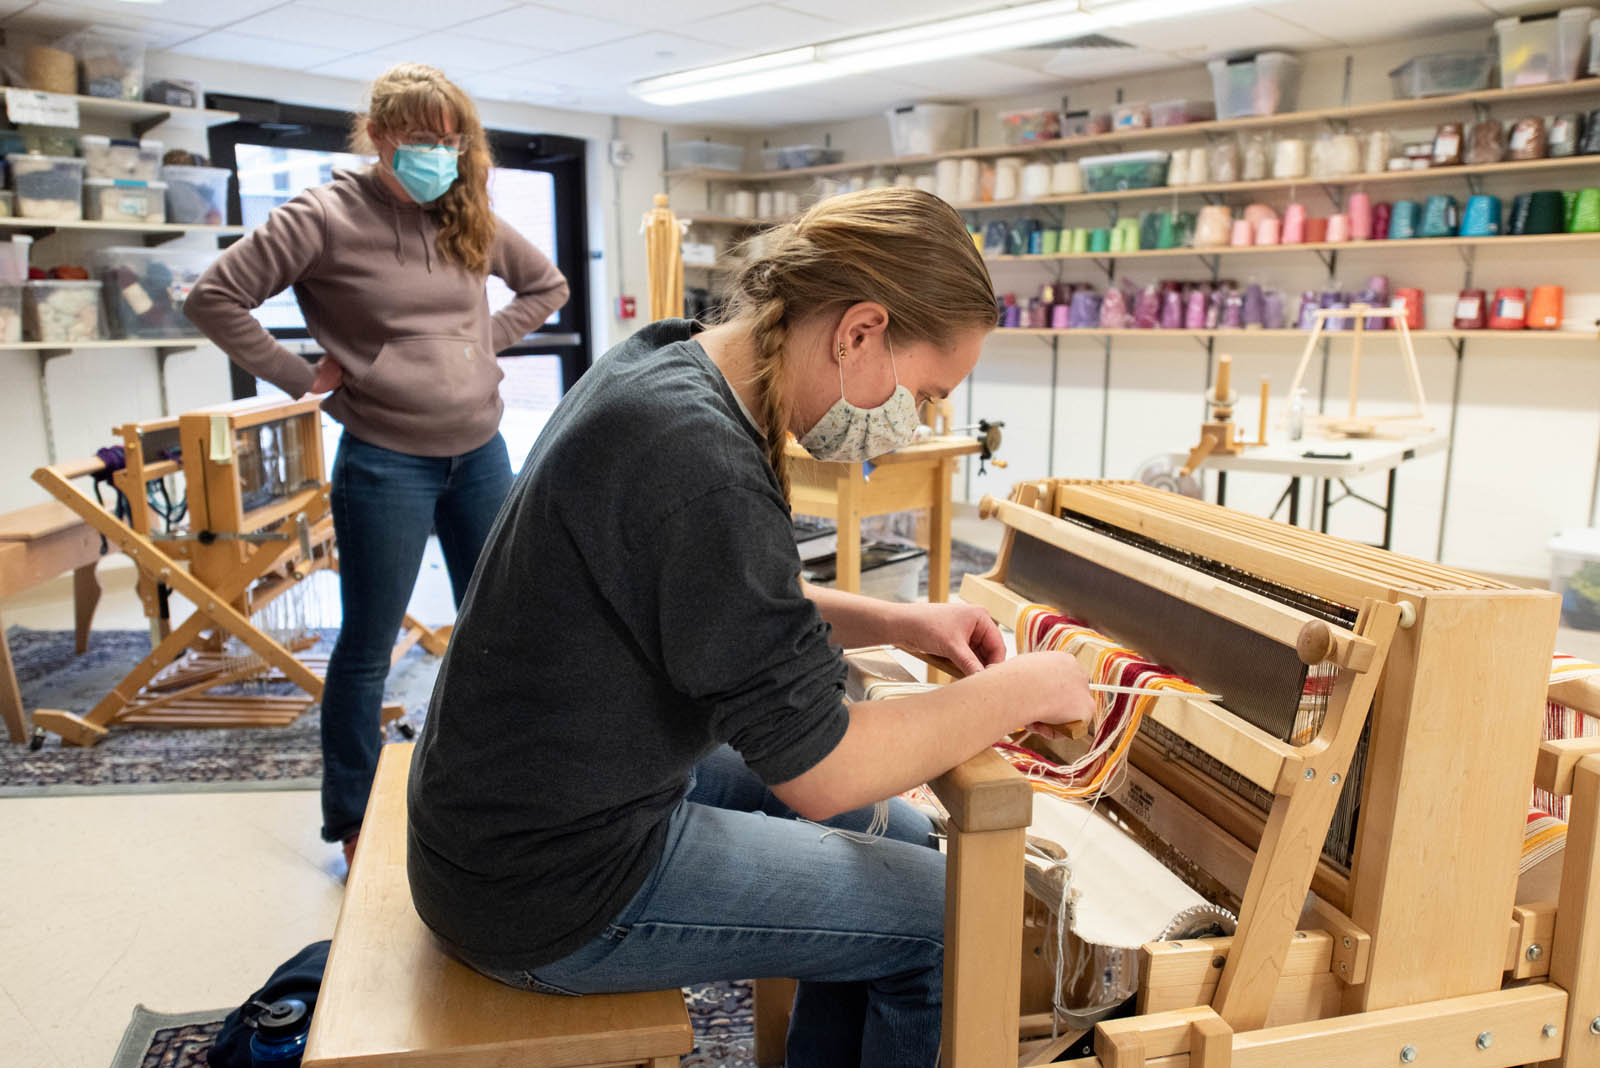 <strong>Frances Heiss '15</strong> instructs a weaving class in the Arts and Crafts Center attended by <strong>Sarah Edell '24</strong>. Photo by <strong>Chidera Ikpeamarom ’22</strong>